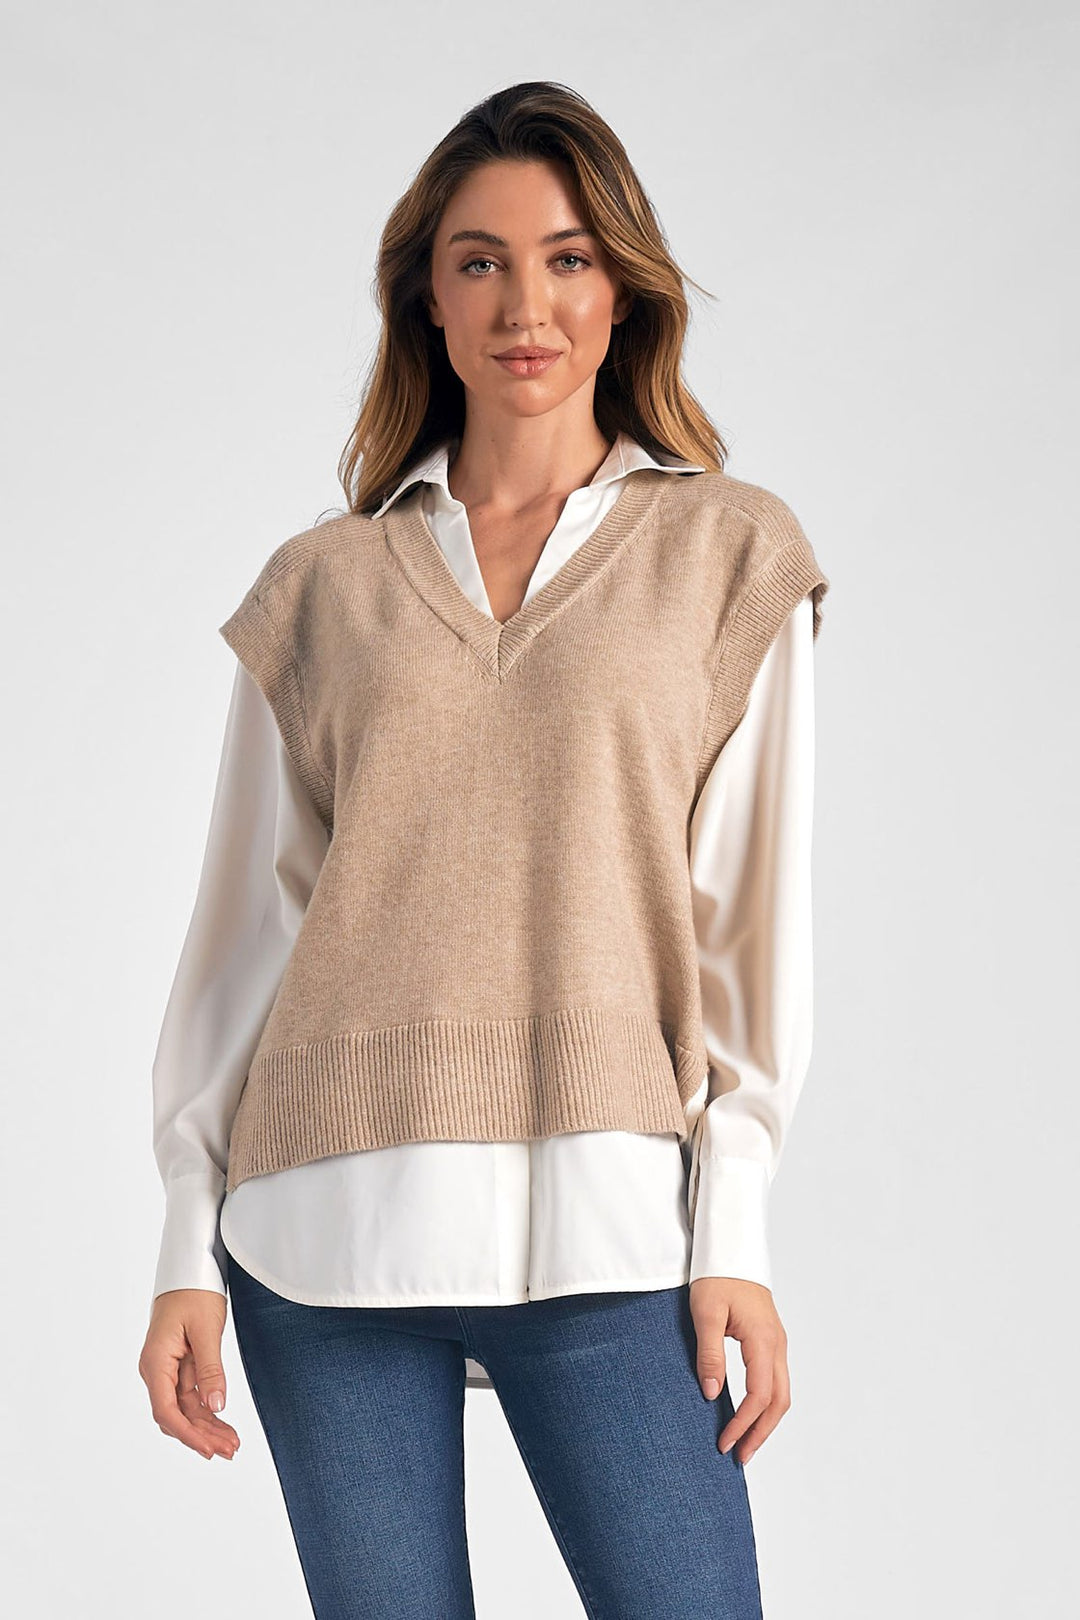 COLLARED BLOUSE SWEATER- WHITE/TAUPE